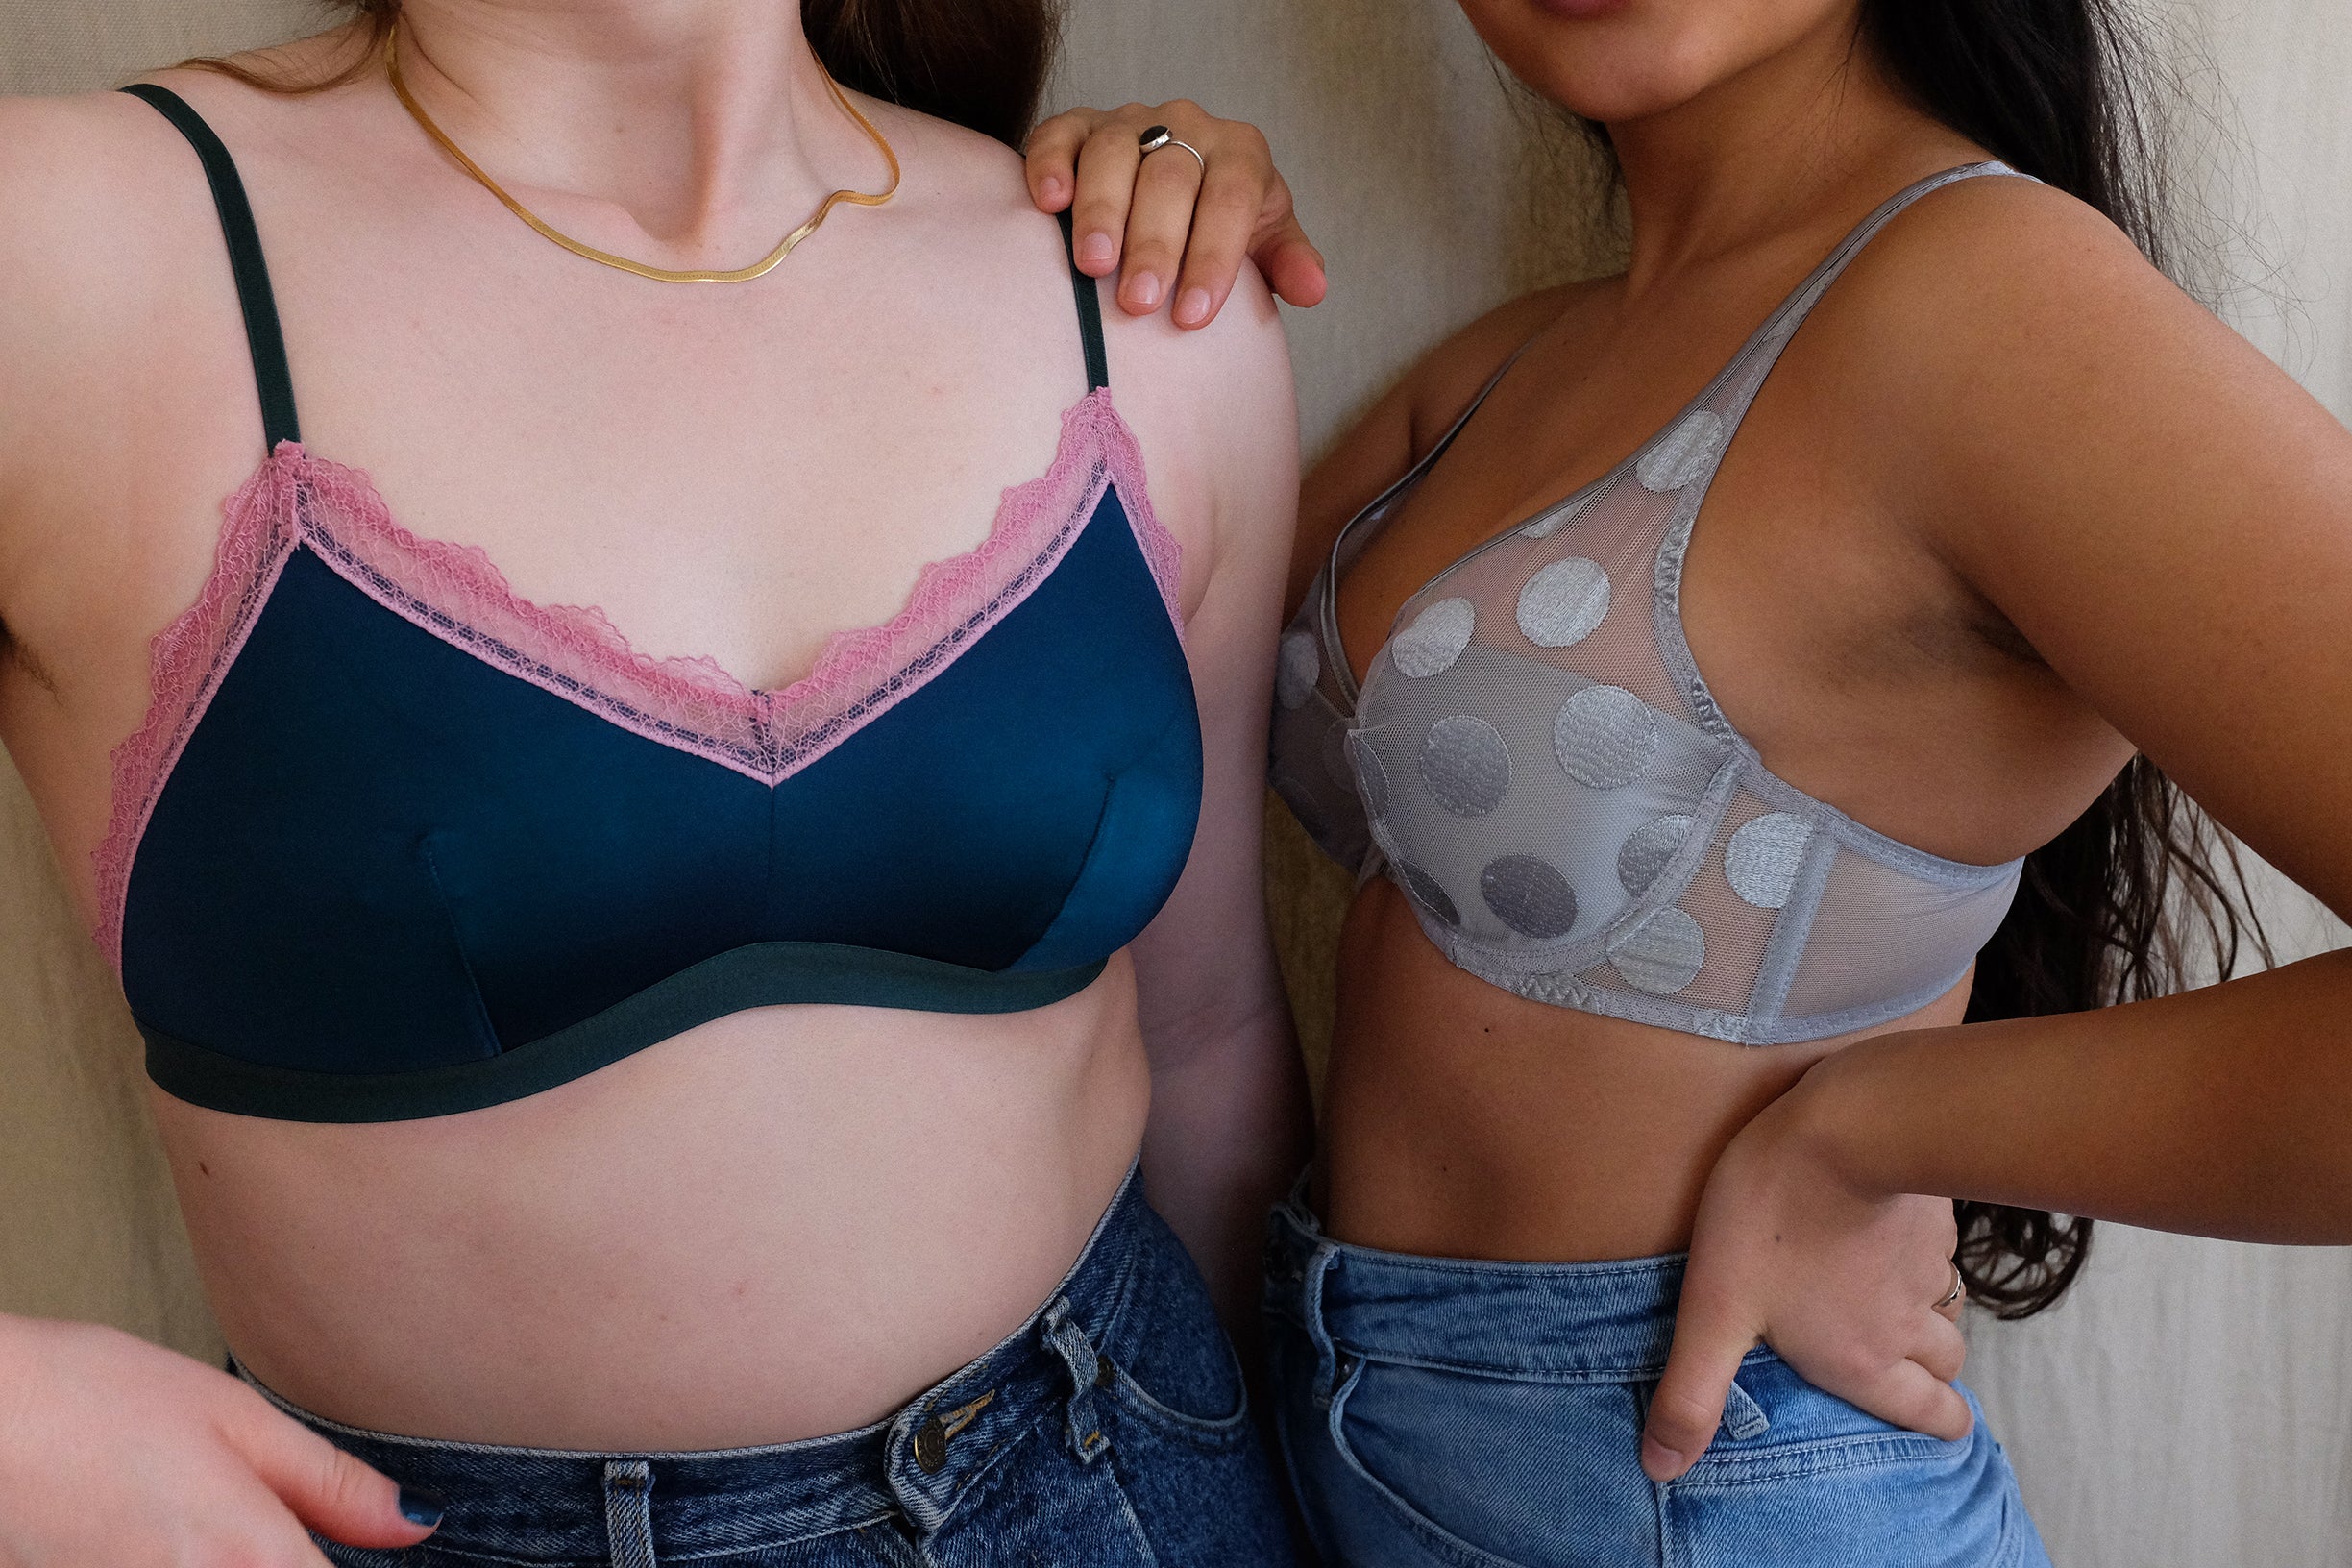 How To Measure Bra Size Using Online Bra Fitting Calculators or Bra Fitting  Guides. Do They Work?